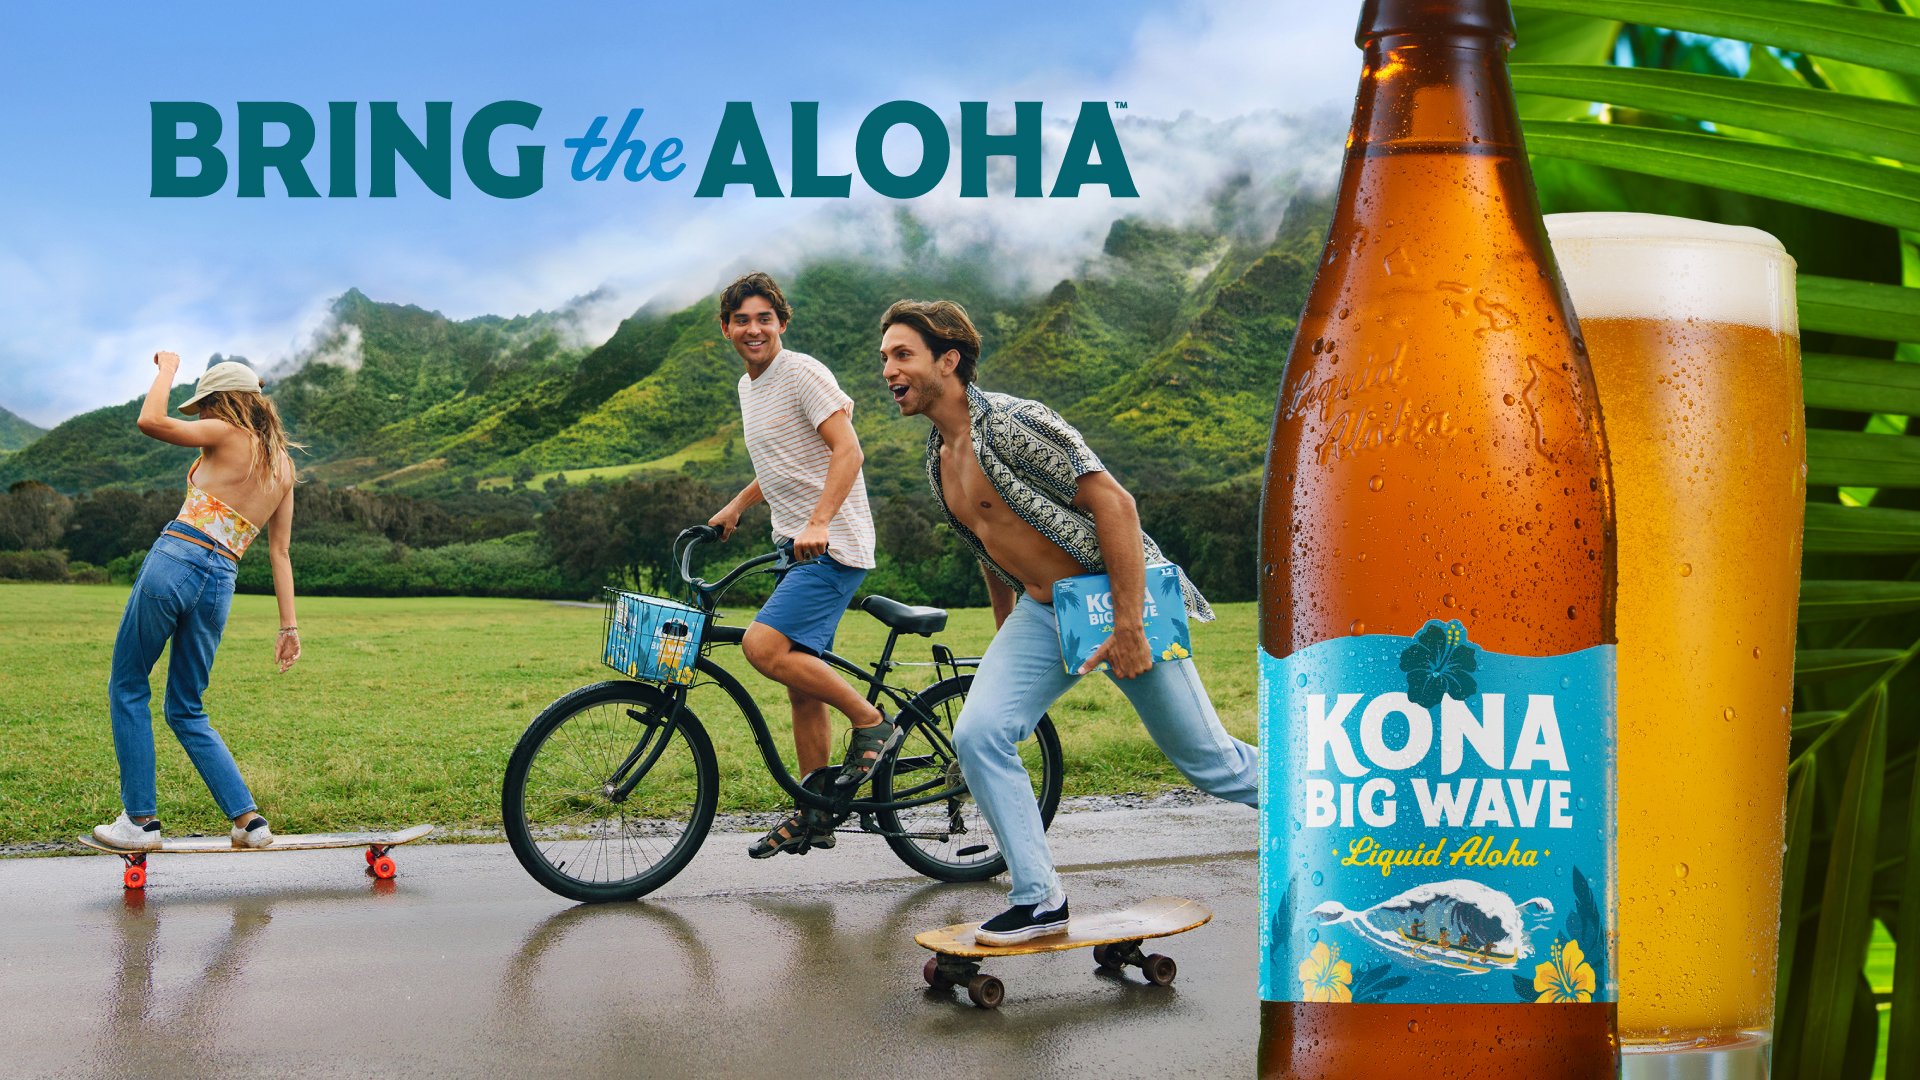 Kona Big Wave Debuts Brand Relaunch and Encourages Fans to   “Bring the Aloha” with Vibrant New Campaign